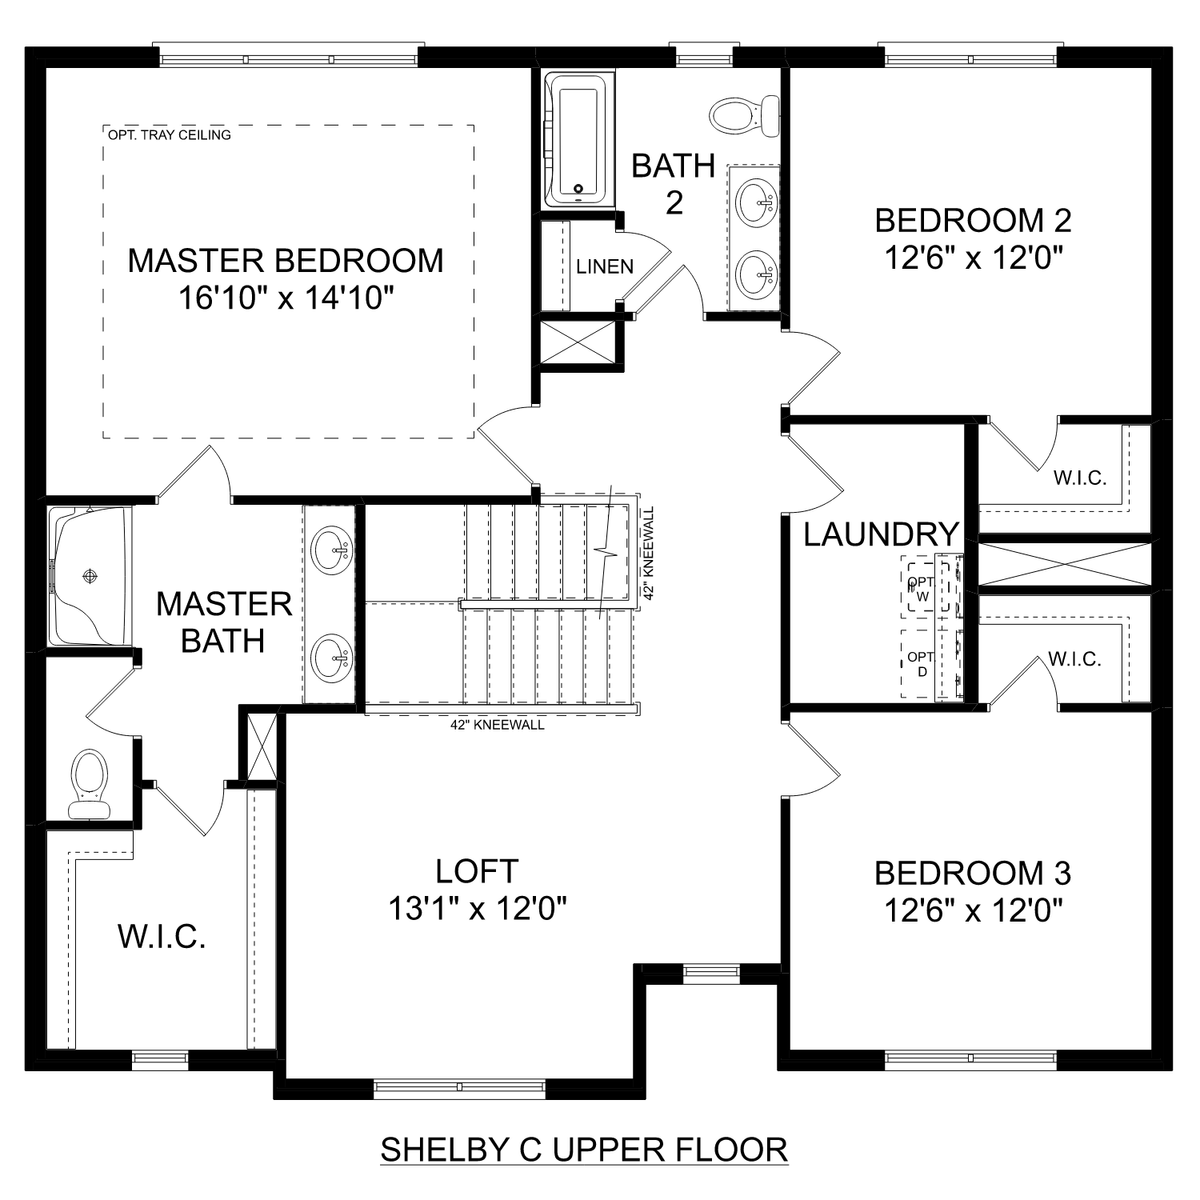 2 - The Shelby C - Side Entry floor plan layout for 307 Creek Grove Avenue in Davidson Homes' Creek Grove community.